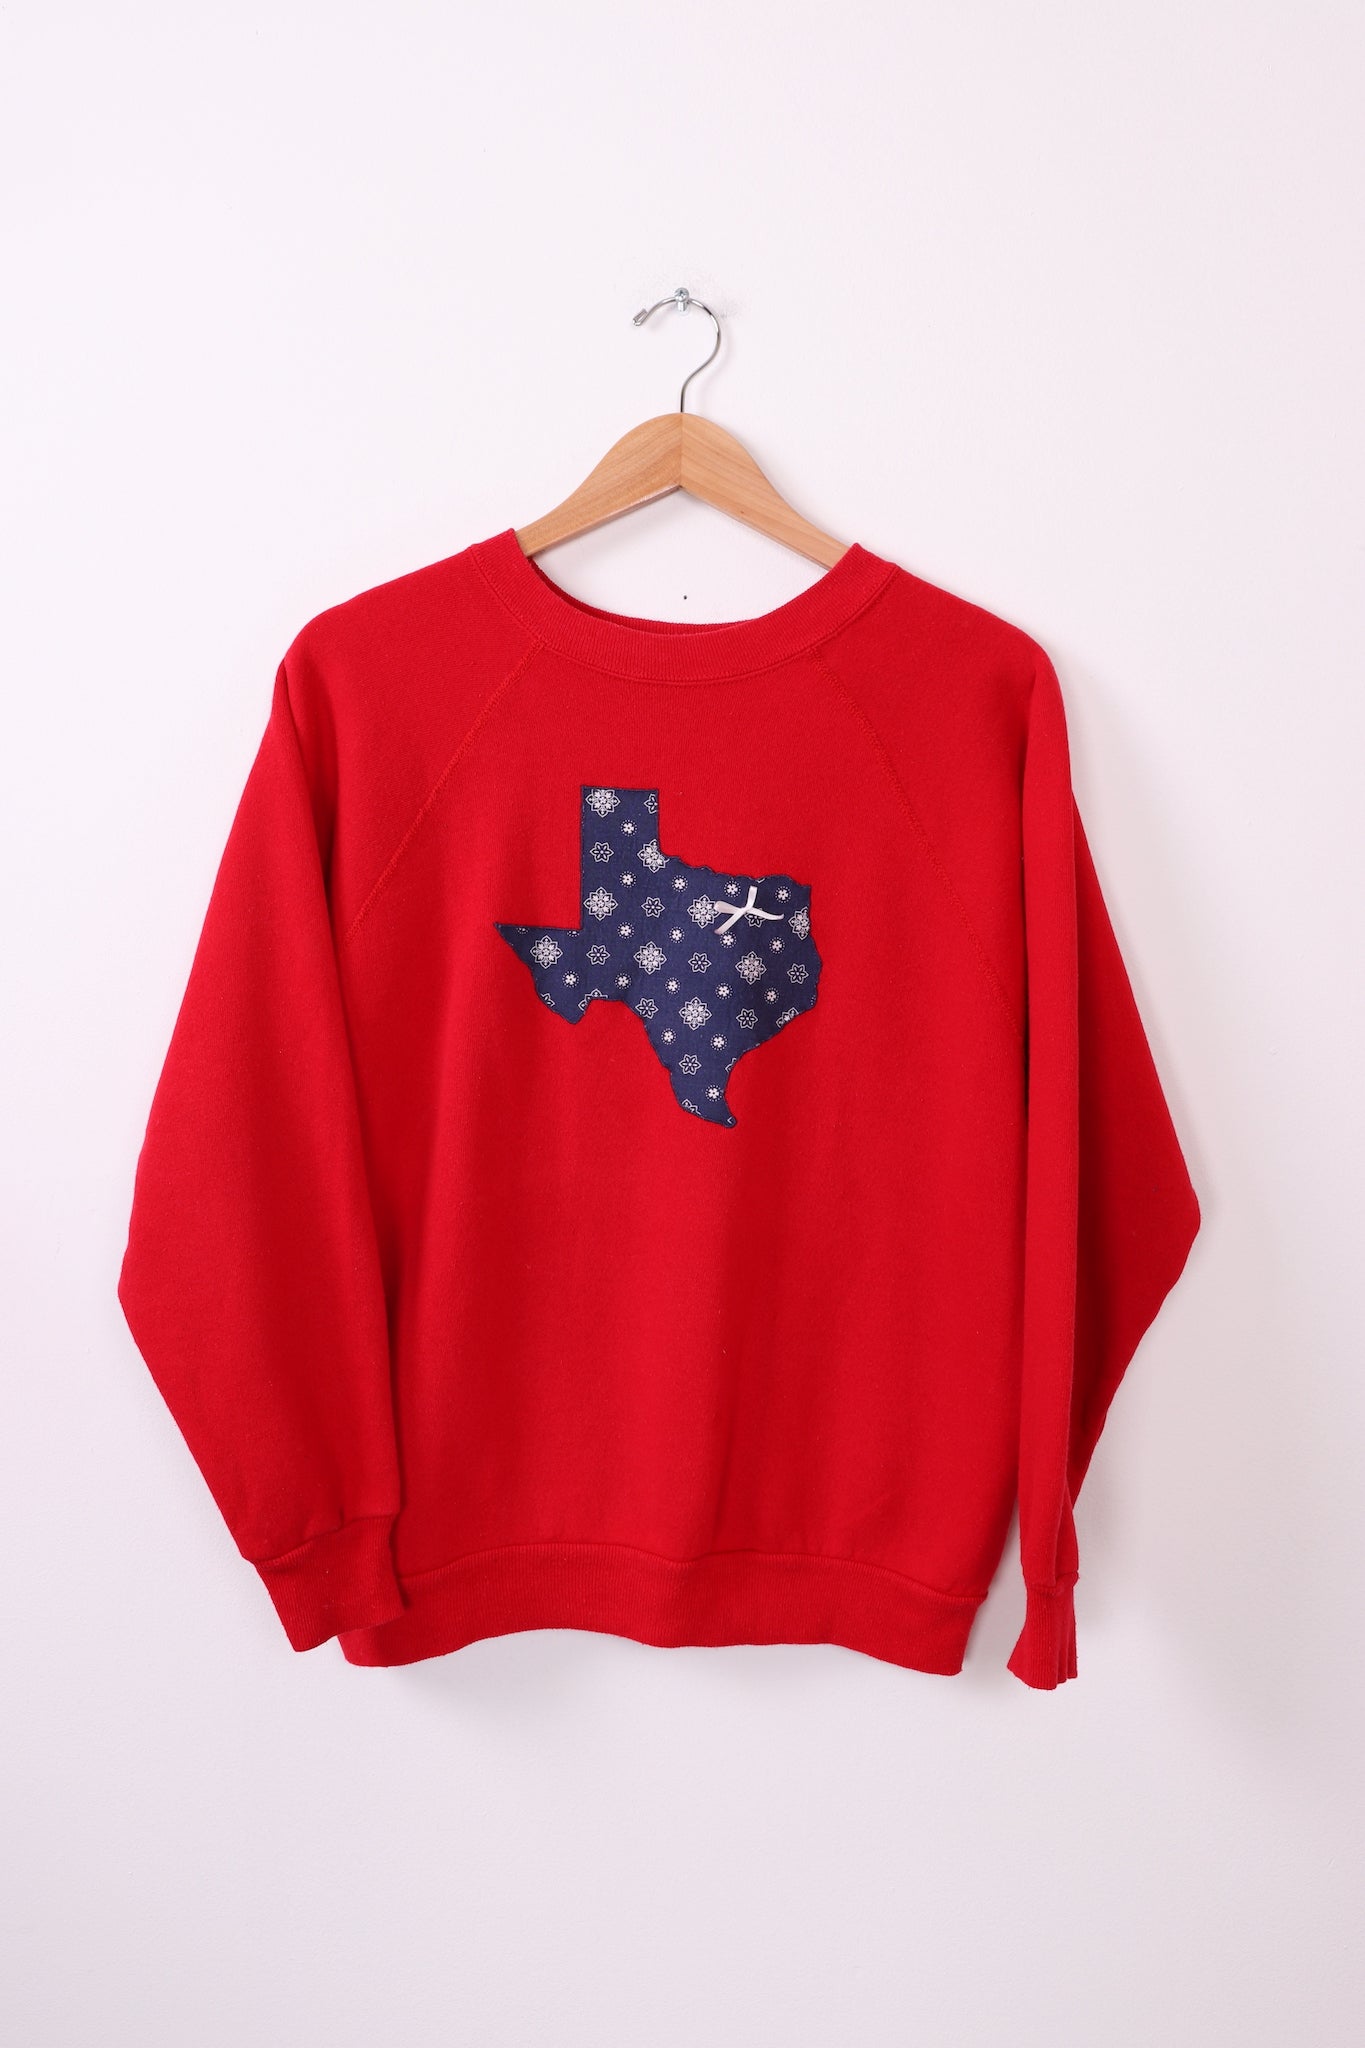 Tultex 70s-80s State of Texas Crewneck